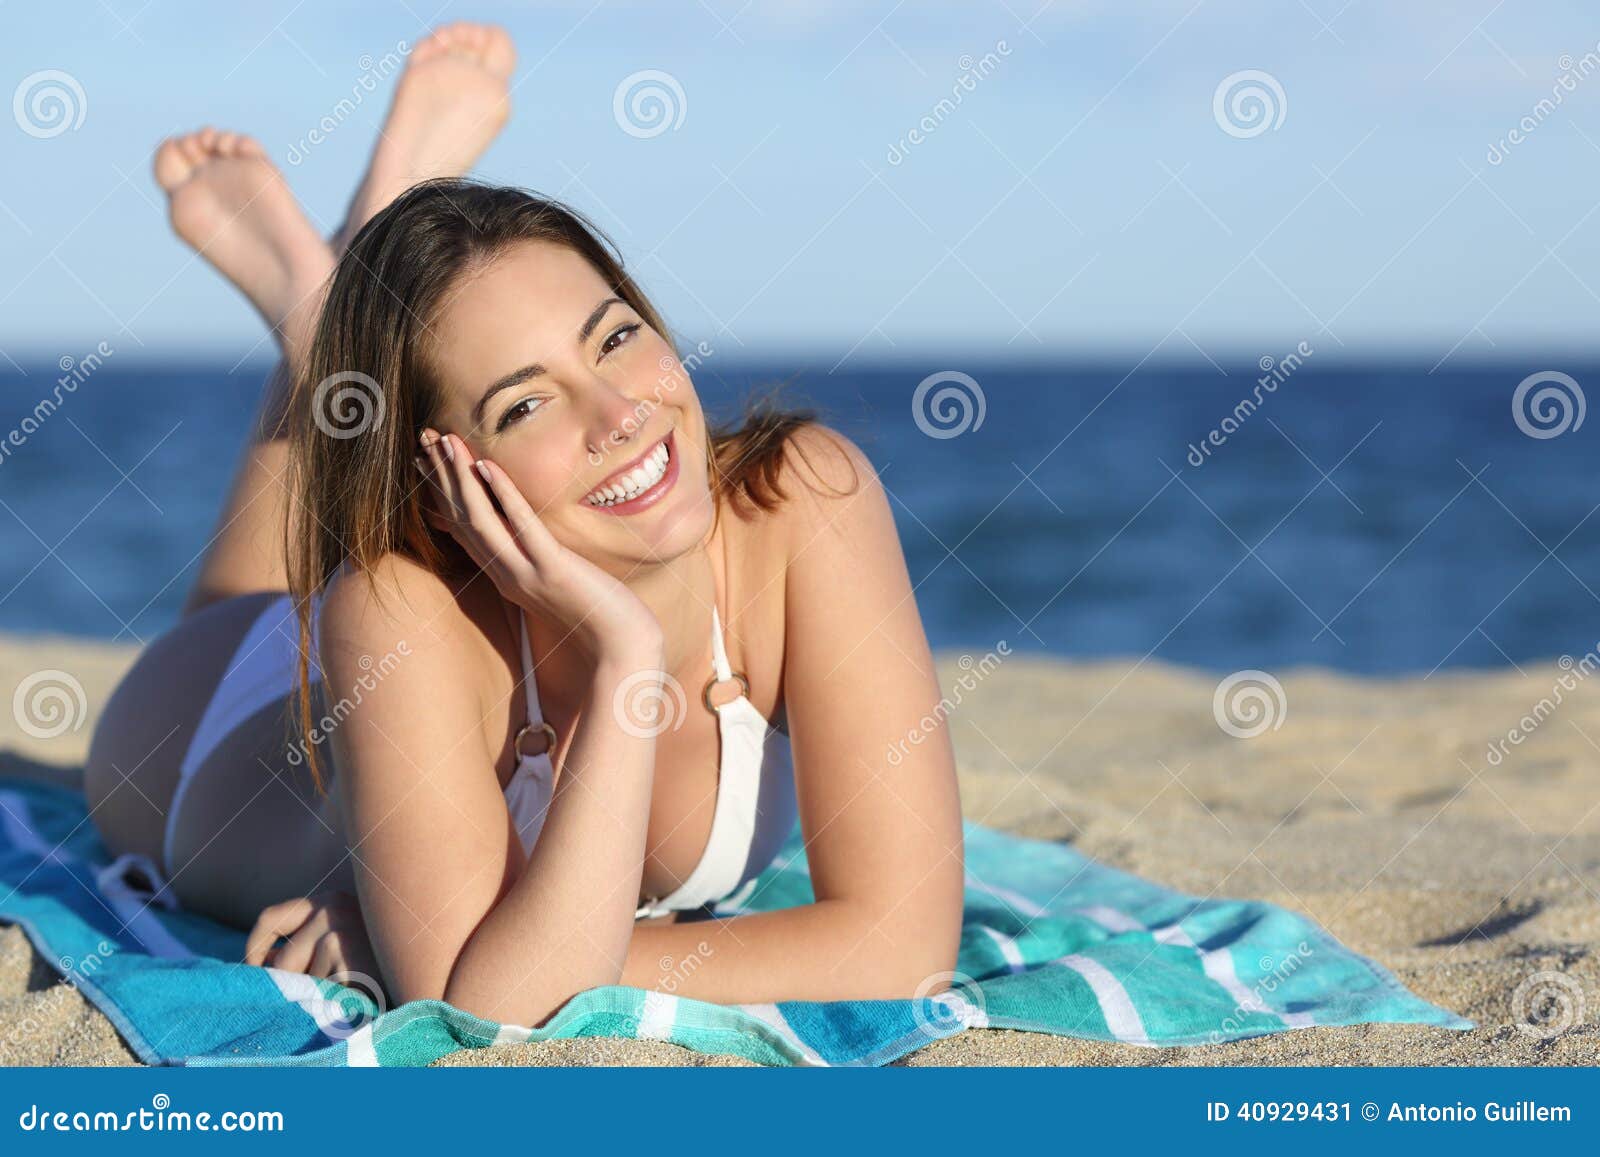 happy woman with white perfect smile resting on the beach